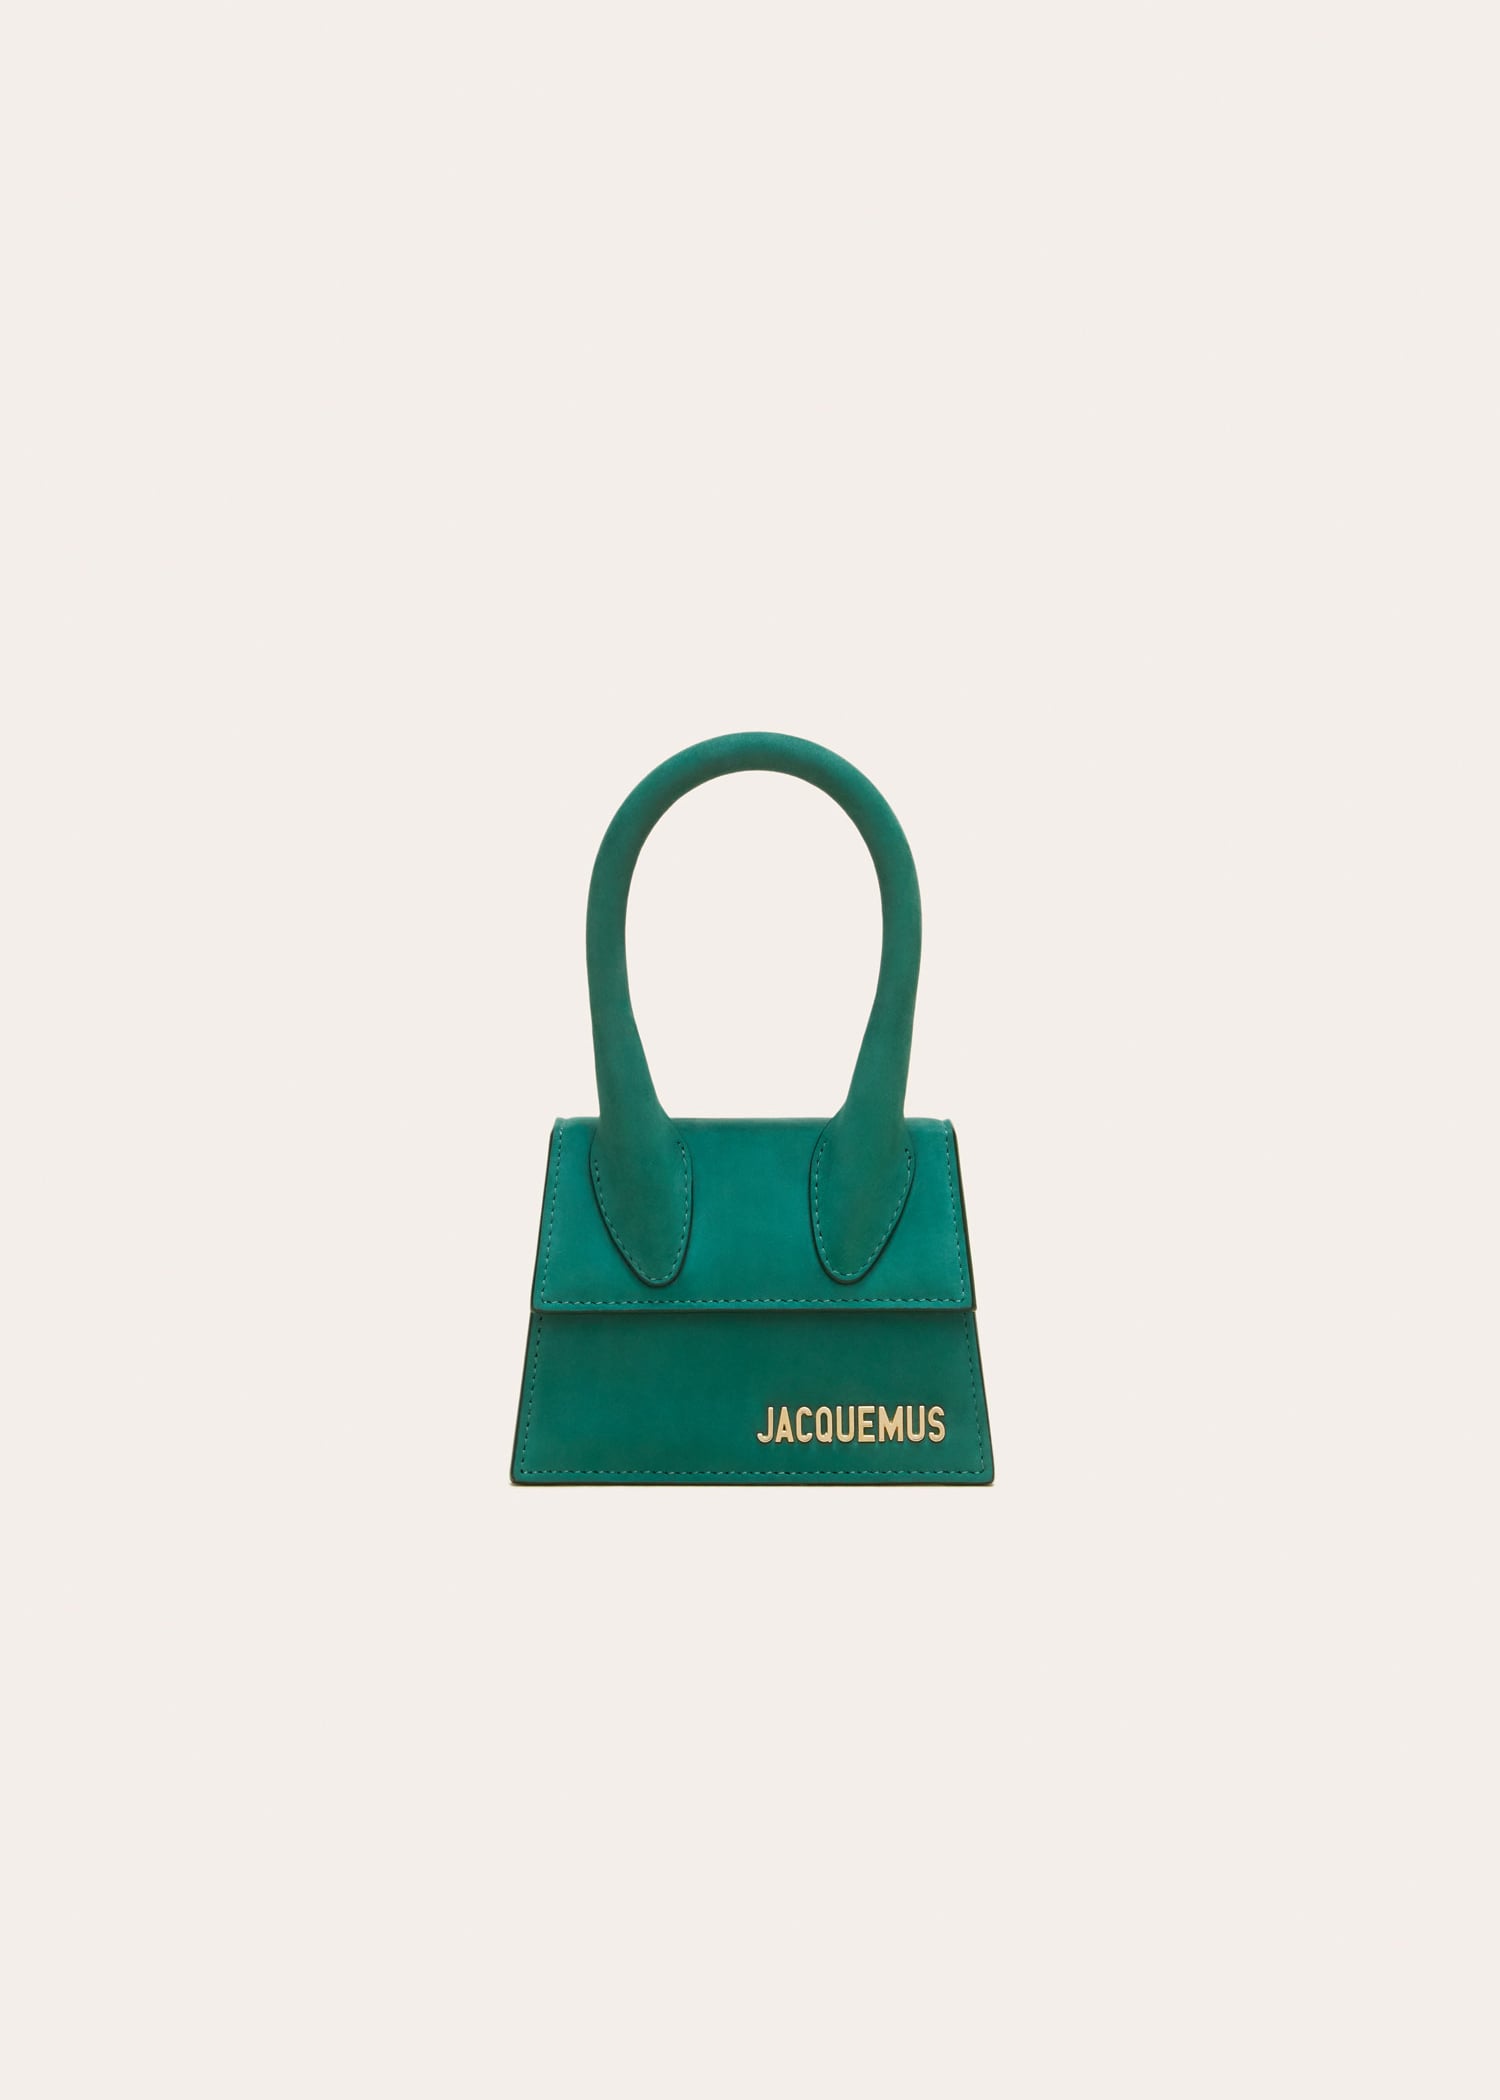 Jacquemus Le Chiquito Micro Bag in Green